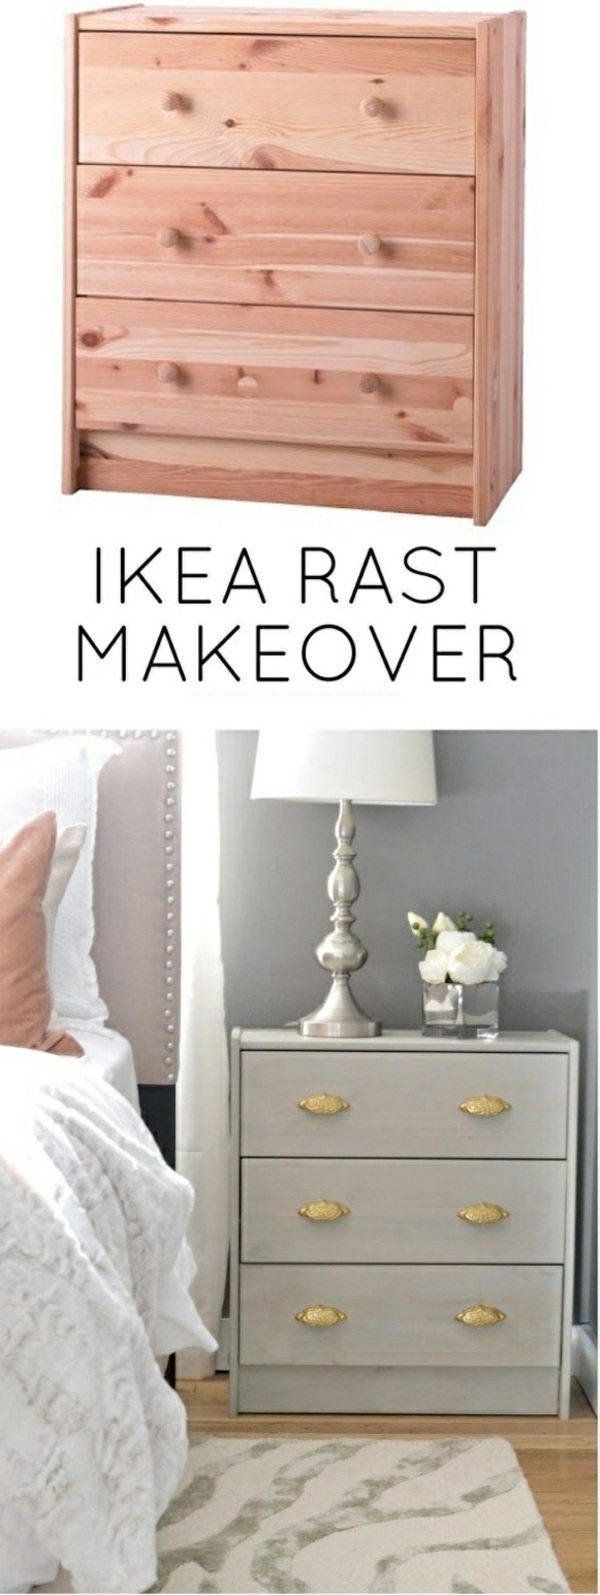 table-de-nuit-deco-chambre-a-coucher-ikea-makeover-resized